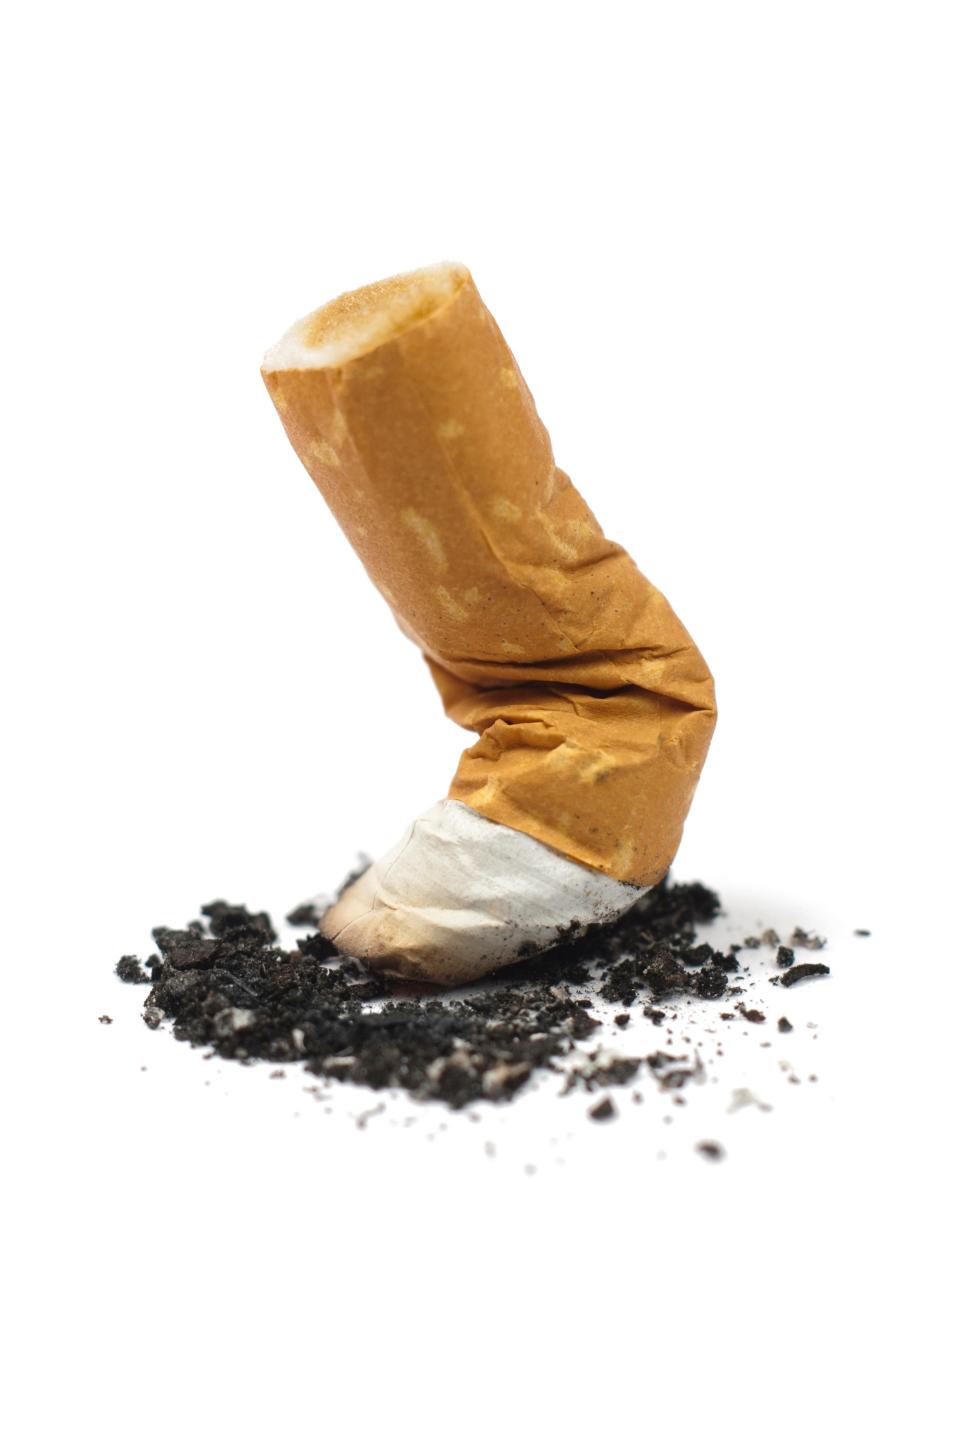 Stock photo of a smashed cigarette butt to illustrate "Quit Smoking" concept. Credit: Pedro Verde, Getty Images Thinkstock GETTY ID#: 153991972